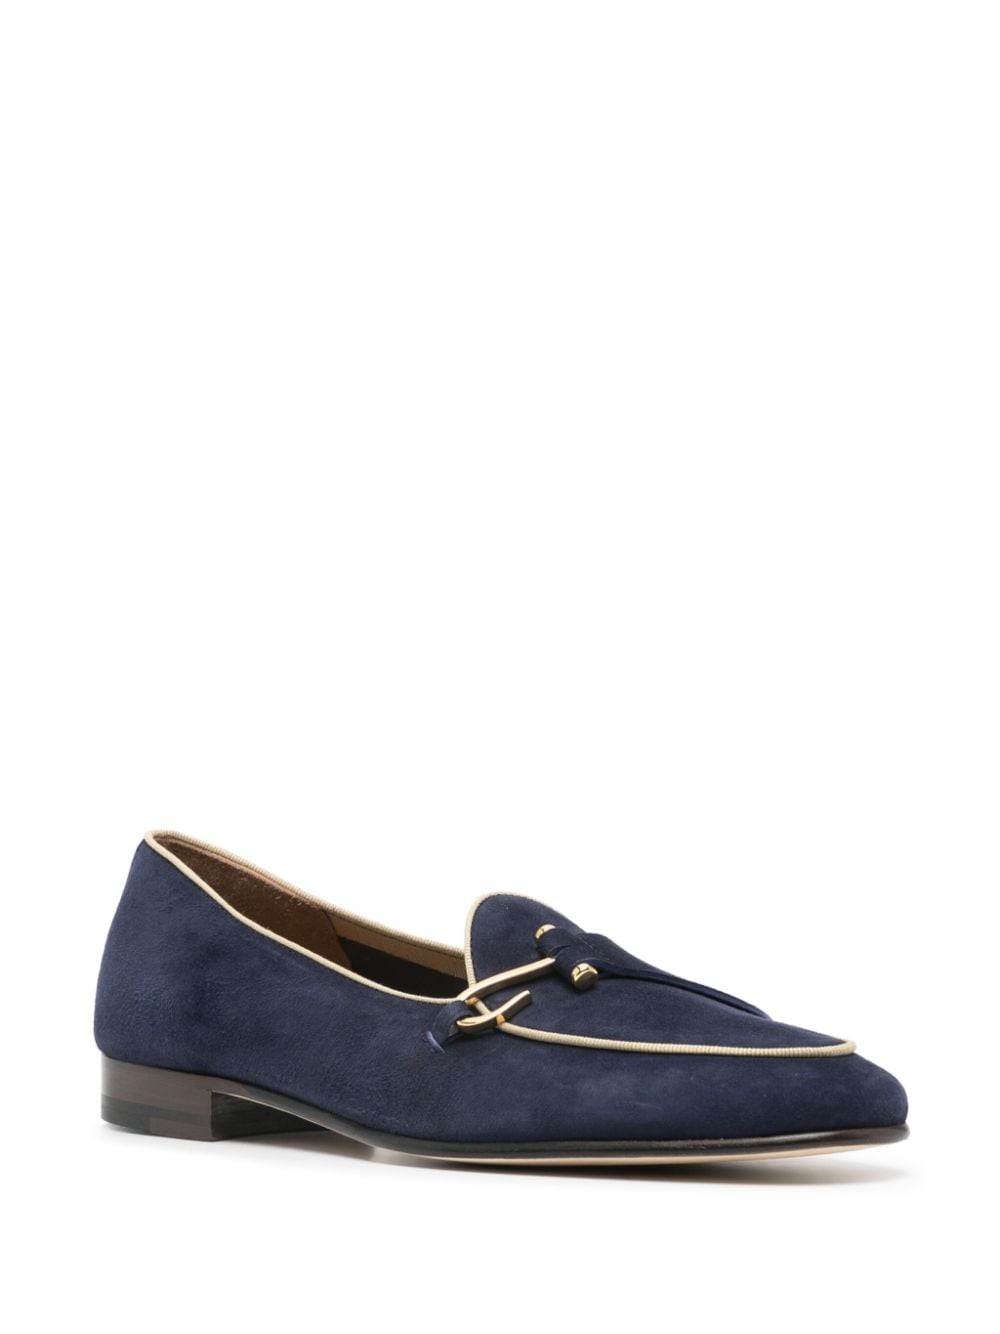 Edhen Milano Comporta suede loafers - Blauw